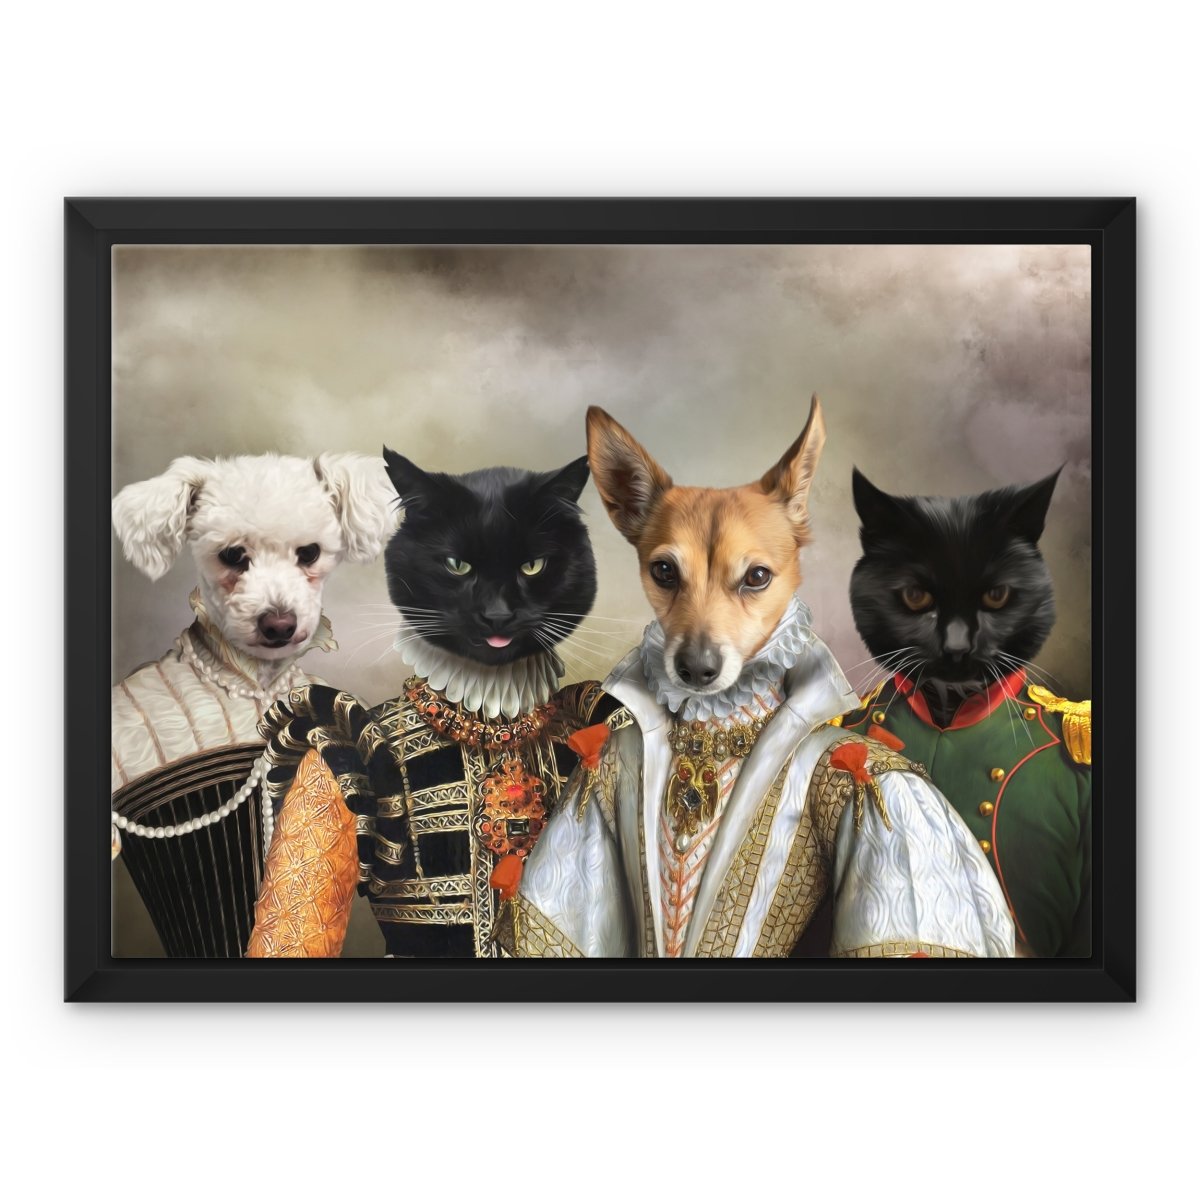 The Dignified 4: Custom Pet Canvas - Paw & Glory - #pet portraits# - #dog portraits# - #pet portraits uk#pawandglory, pet art canvas,custom pet canvas uk, personalized pet canvas art, custom pet canvas art, your pet on canvas, pet photo canvas